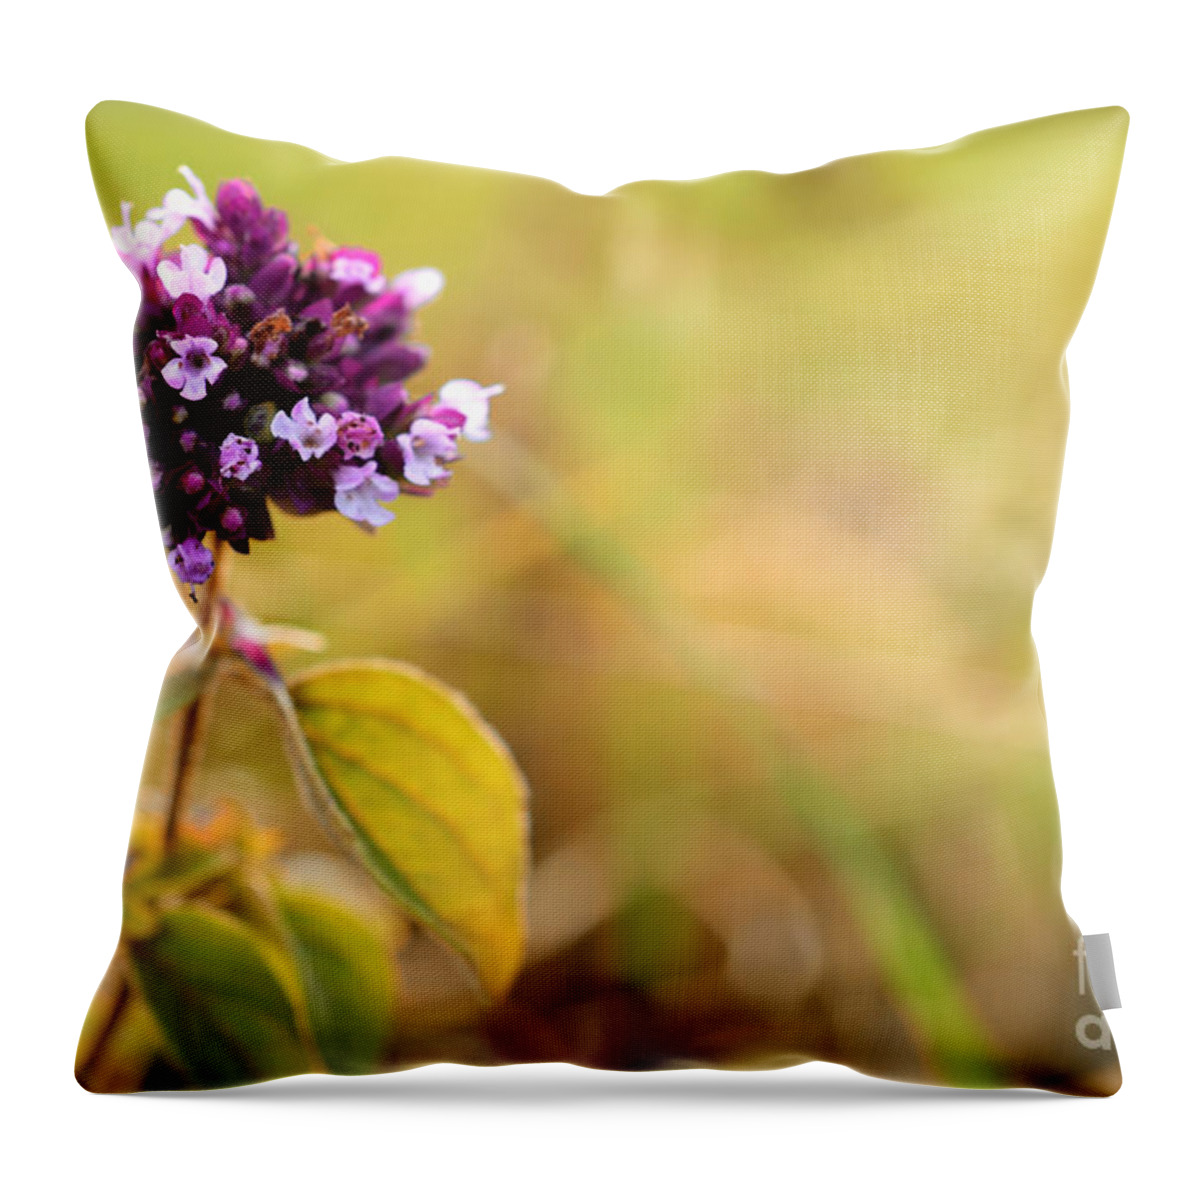 Autumn; Flowers; Flower; Colorful; Colors; Wood; Nature; Natural; Fall; Still; Sabine Jacobs; Purple; Field; Throw Pillow featuring the photograph Autumn Flower in a Field by Sabine Jacobs